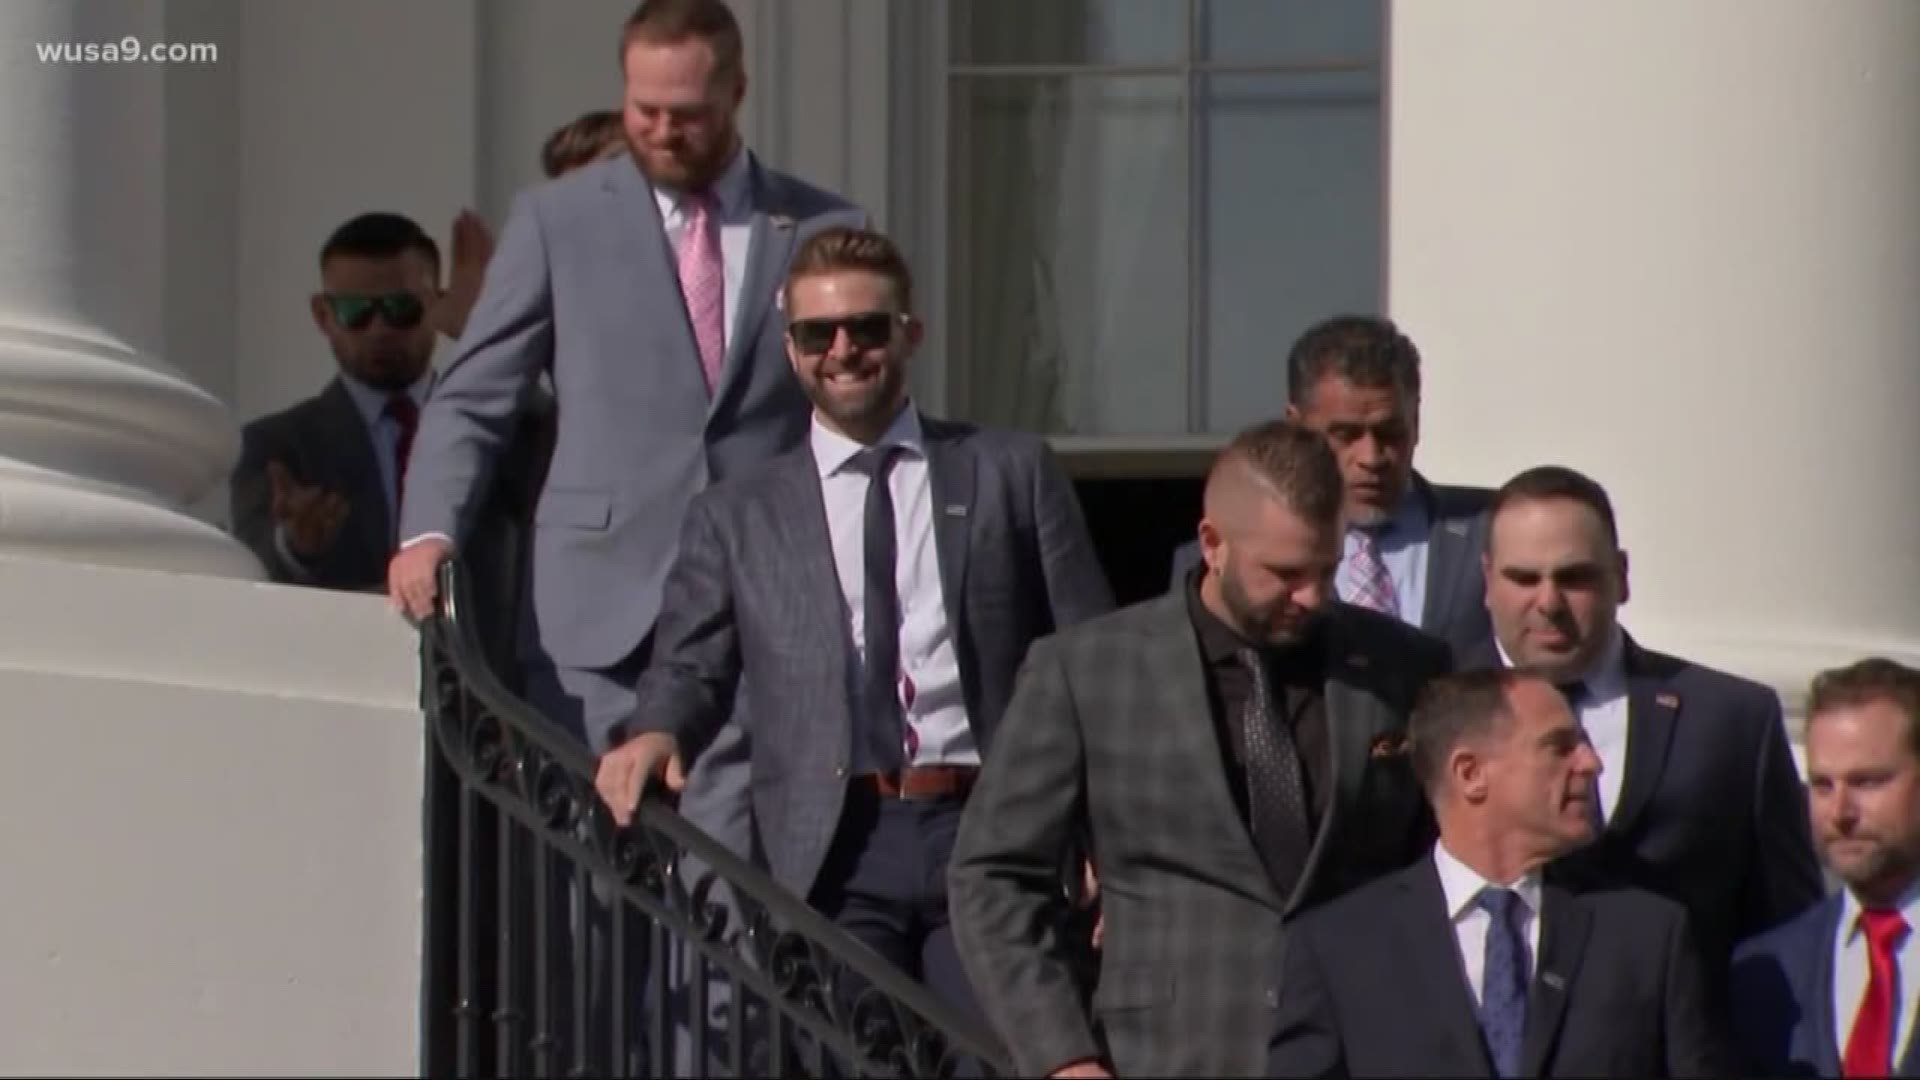 Politics took a back seat at the White House during the Nationals visit.